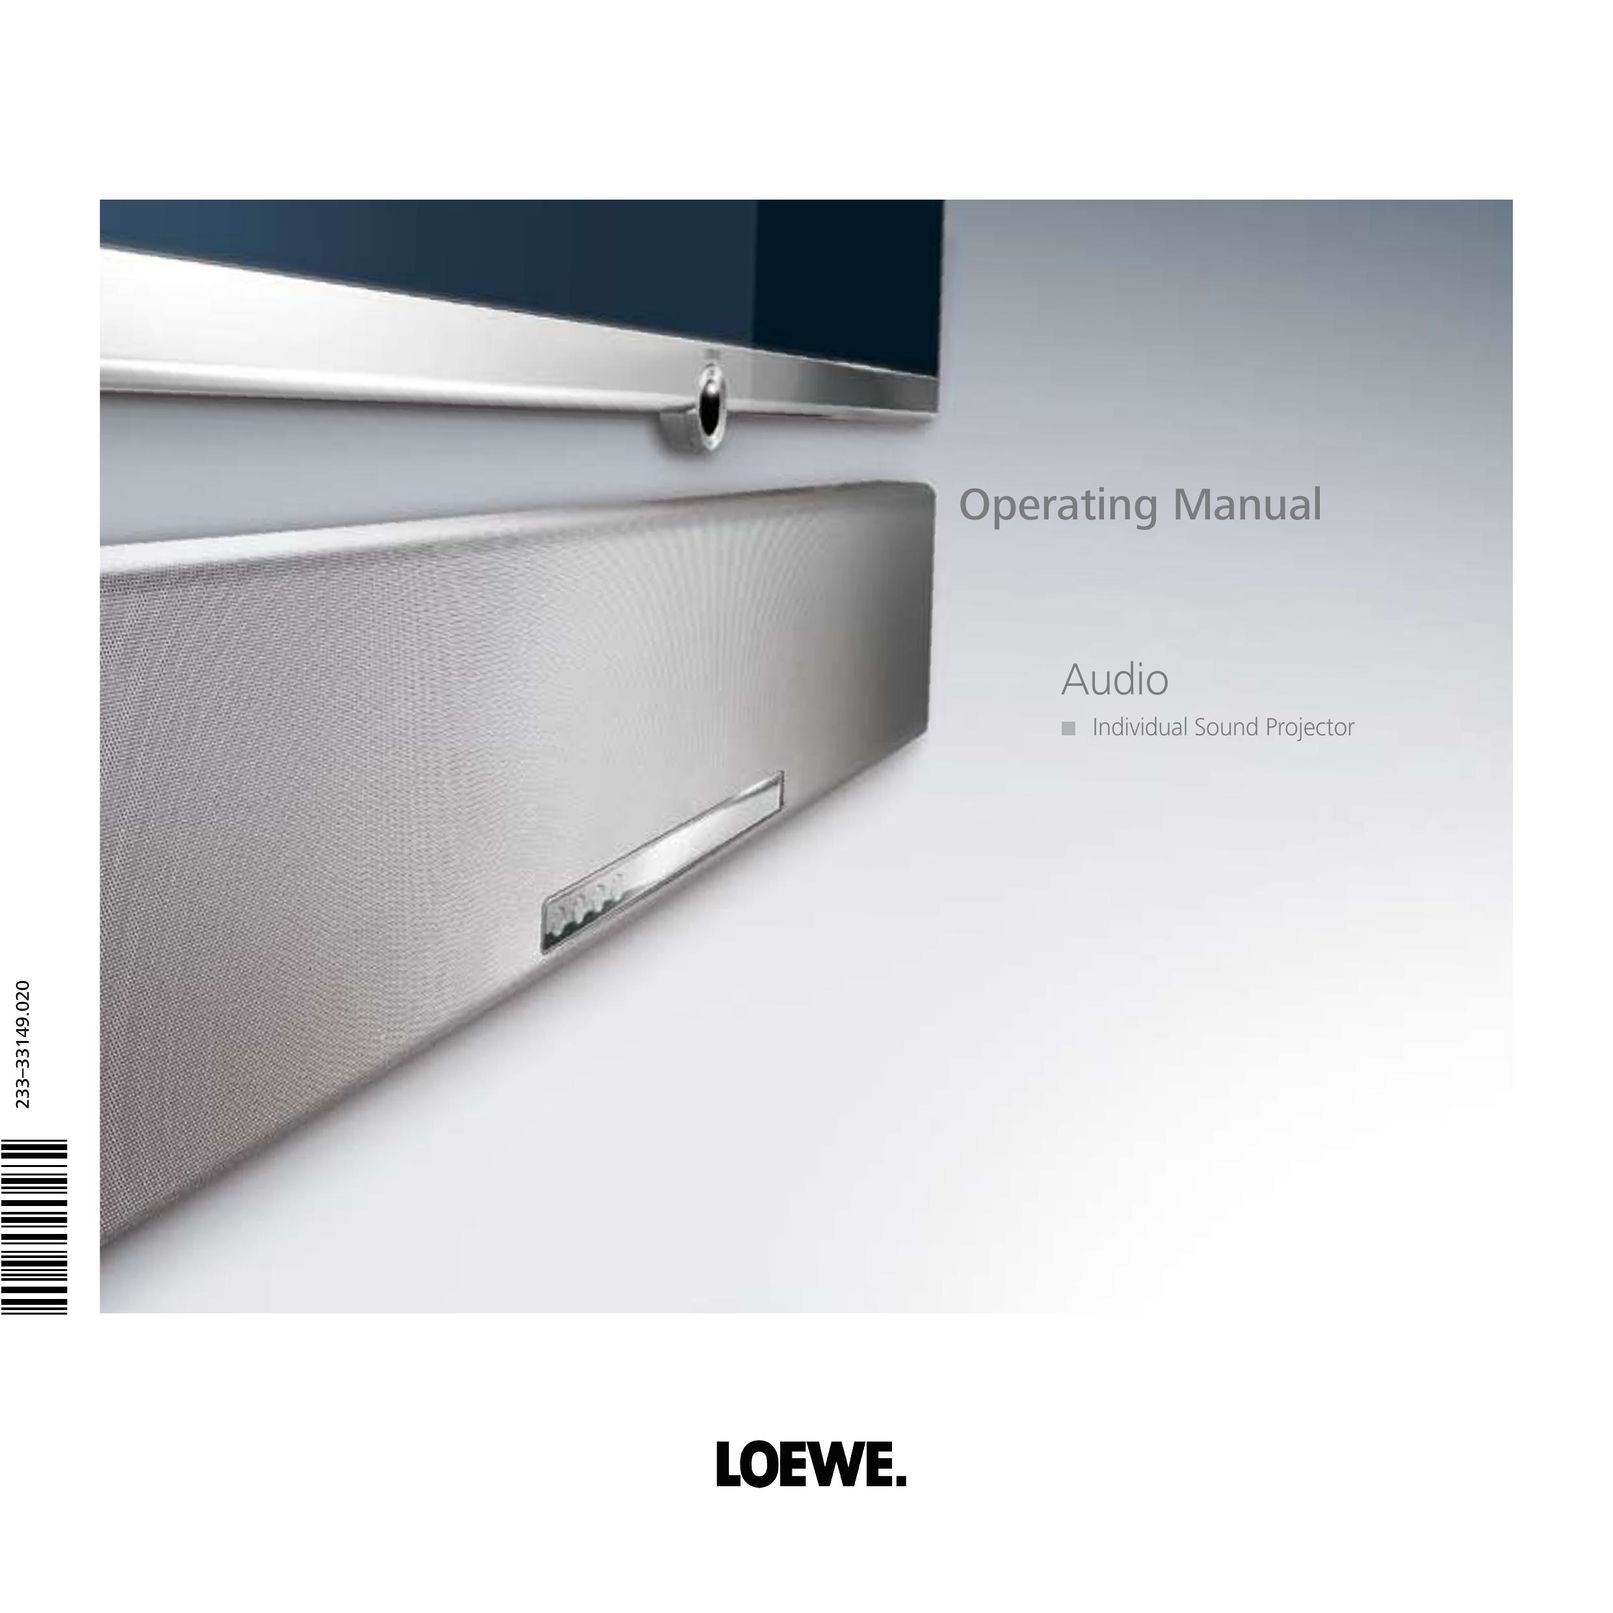 Loewe Individual Sound Projector Projector User Manual